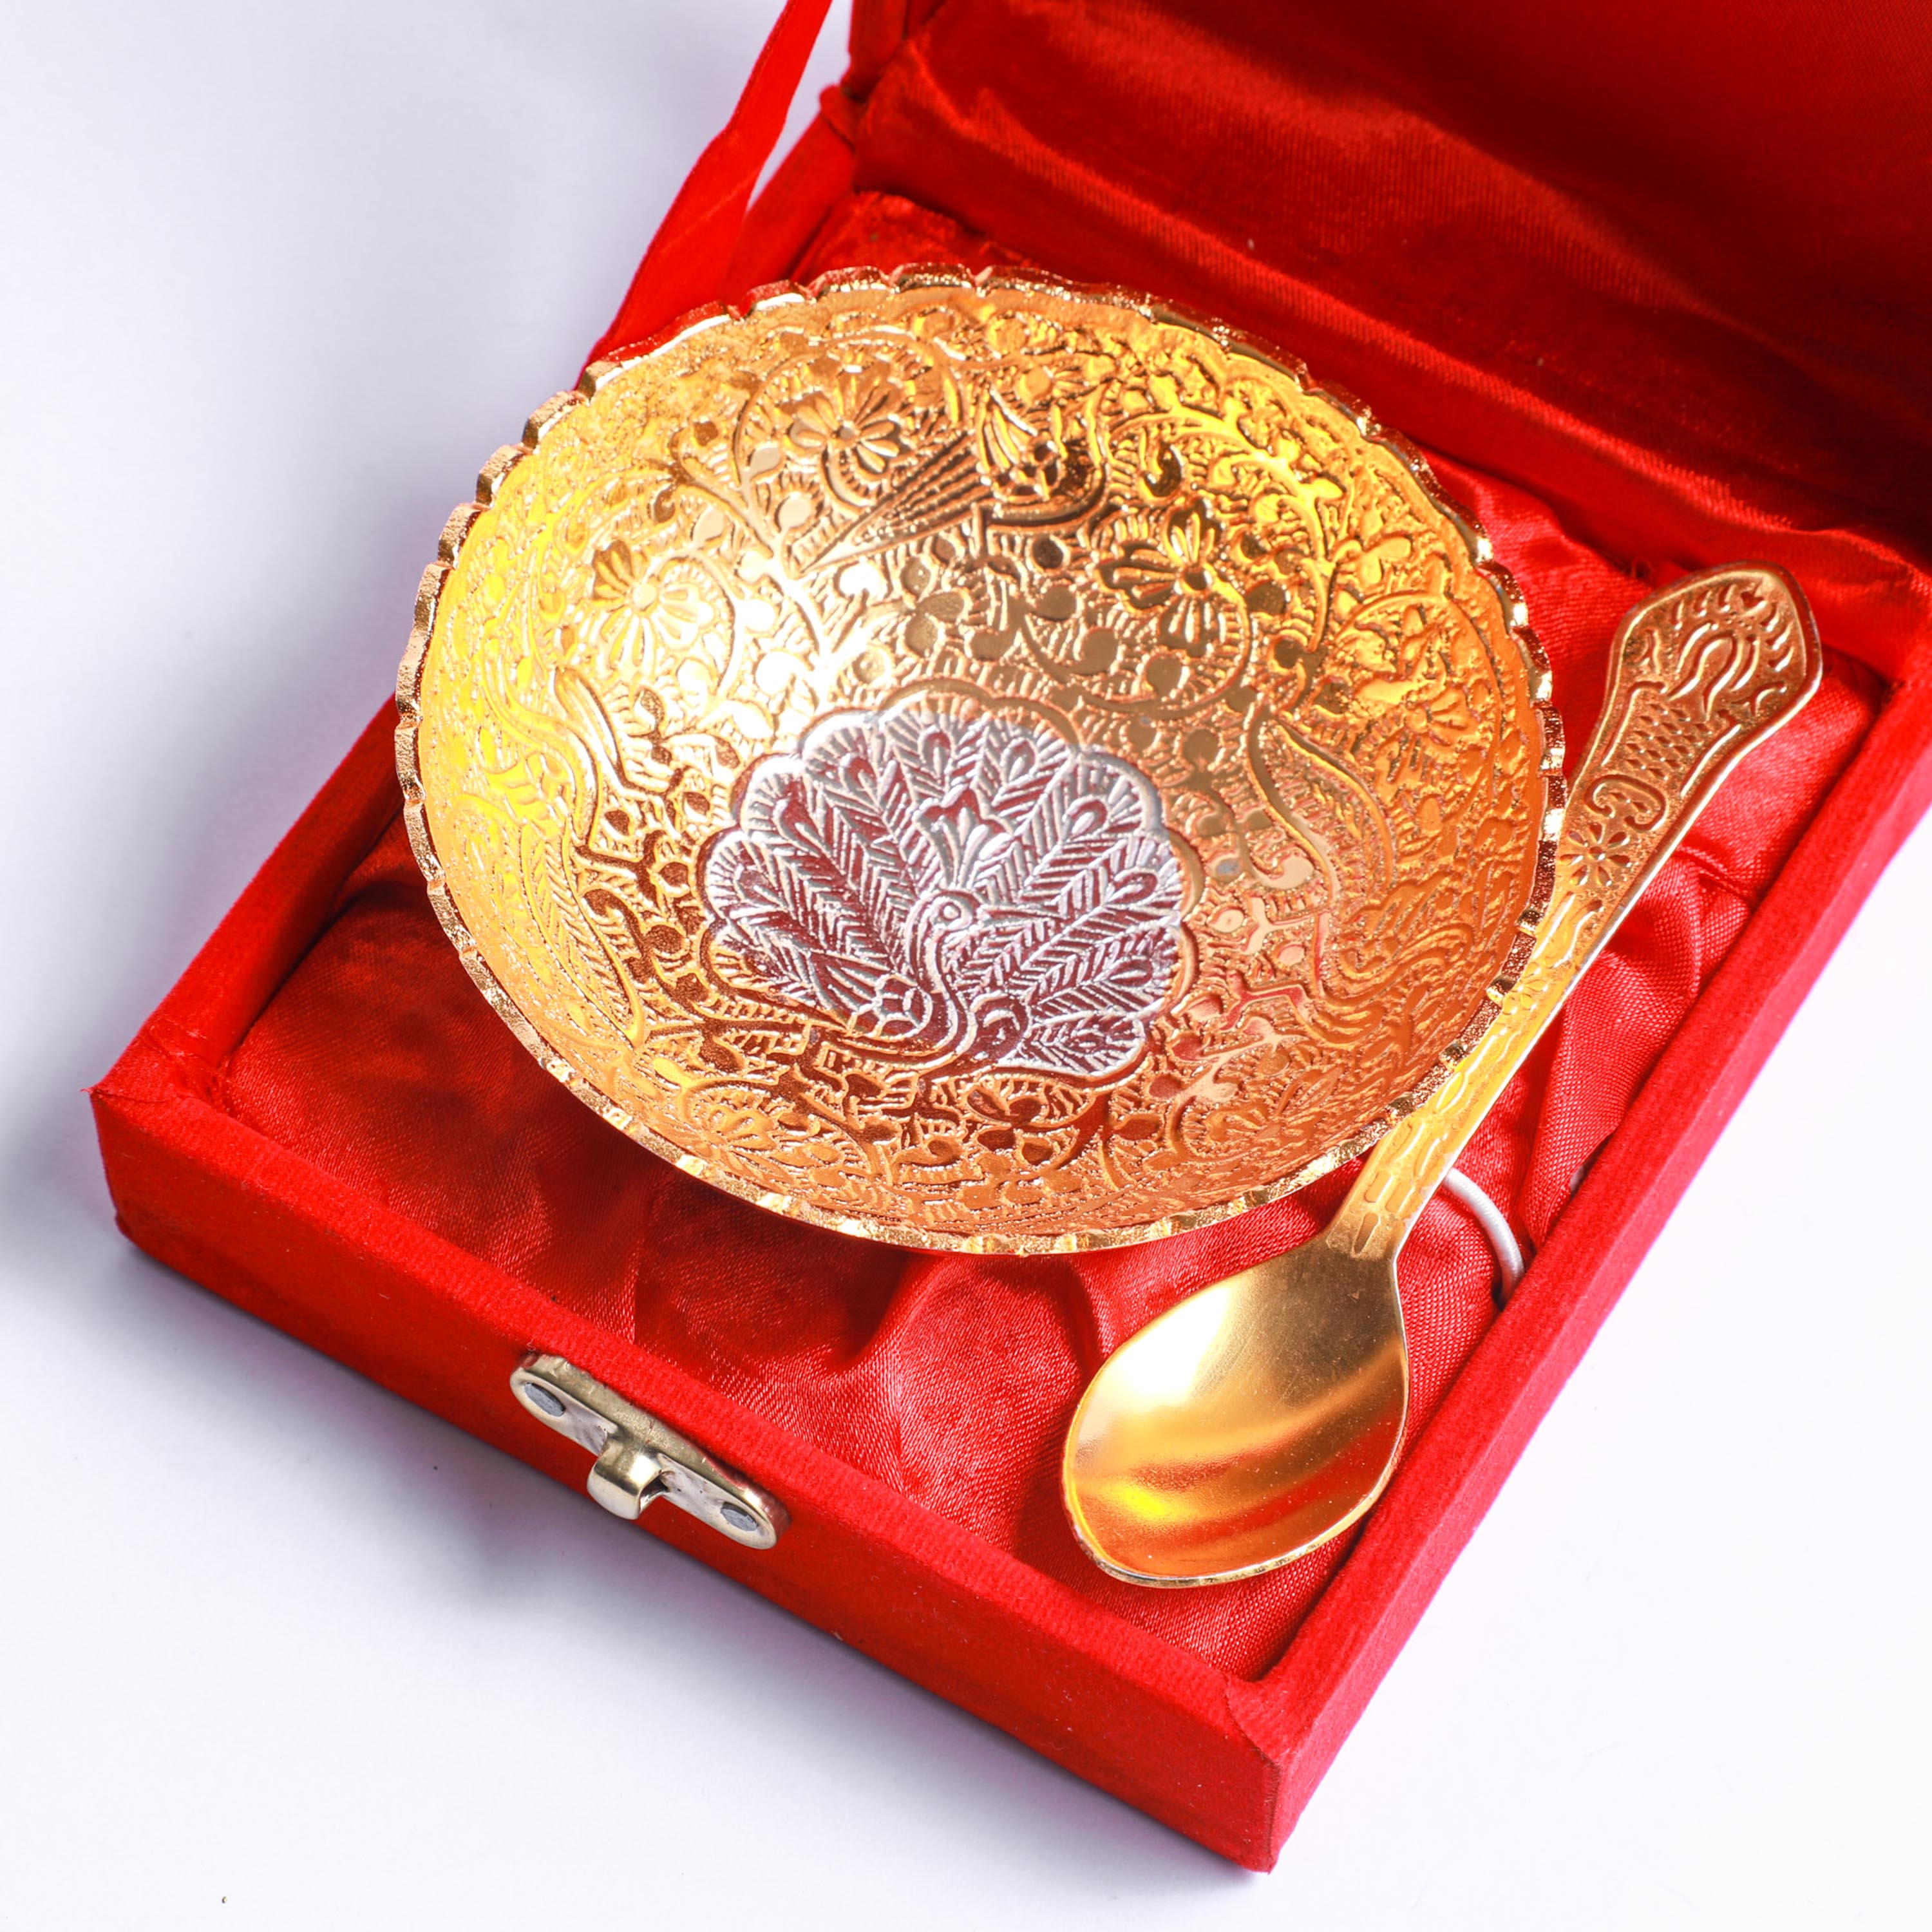 Metal Spoon with Bowl and Box for gifting